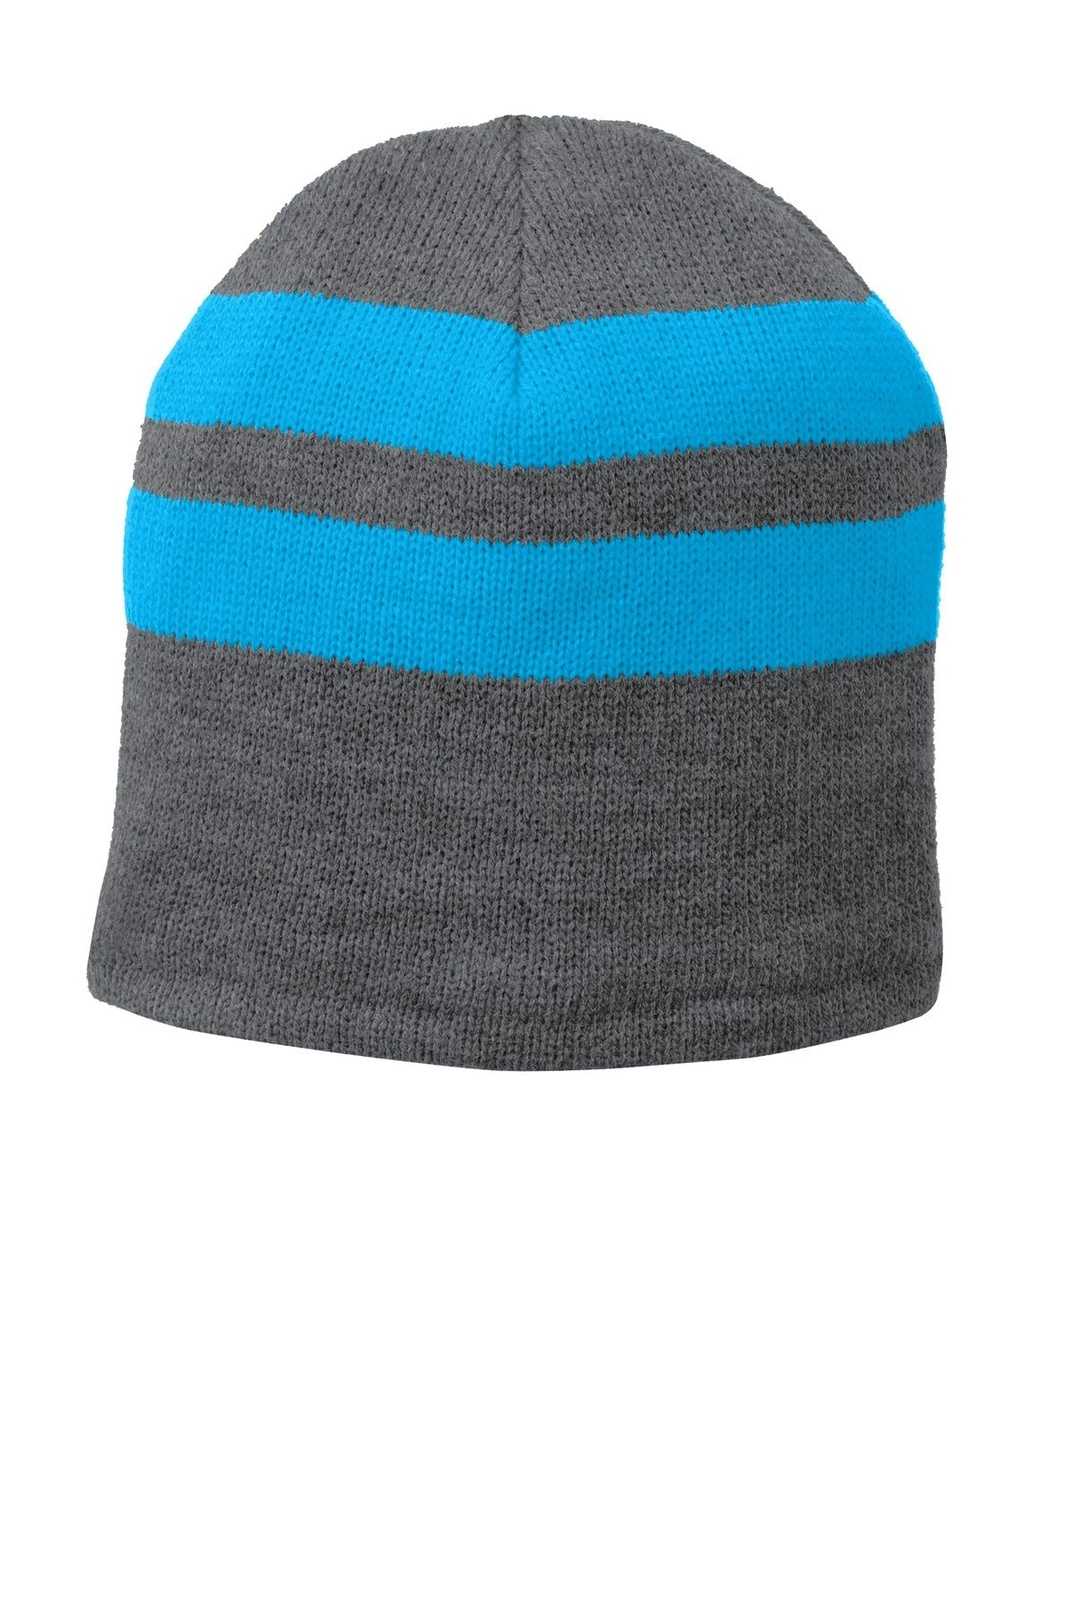 Port &amp; Company C922 Fleece-Lined Striped Beanie Cap - Athletic Oxford Neon Blue - HIT a Double - 1